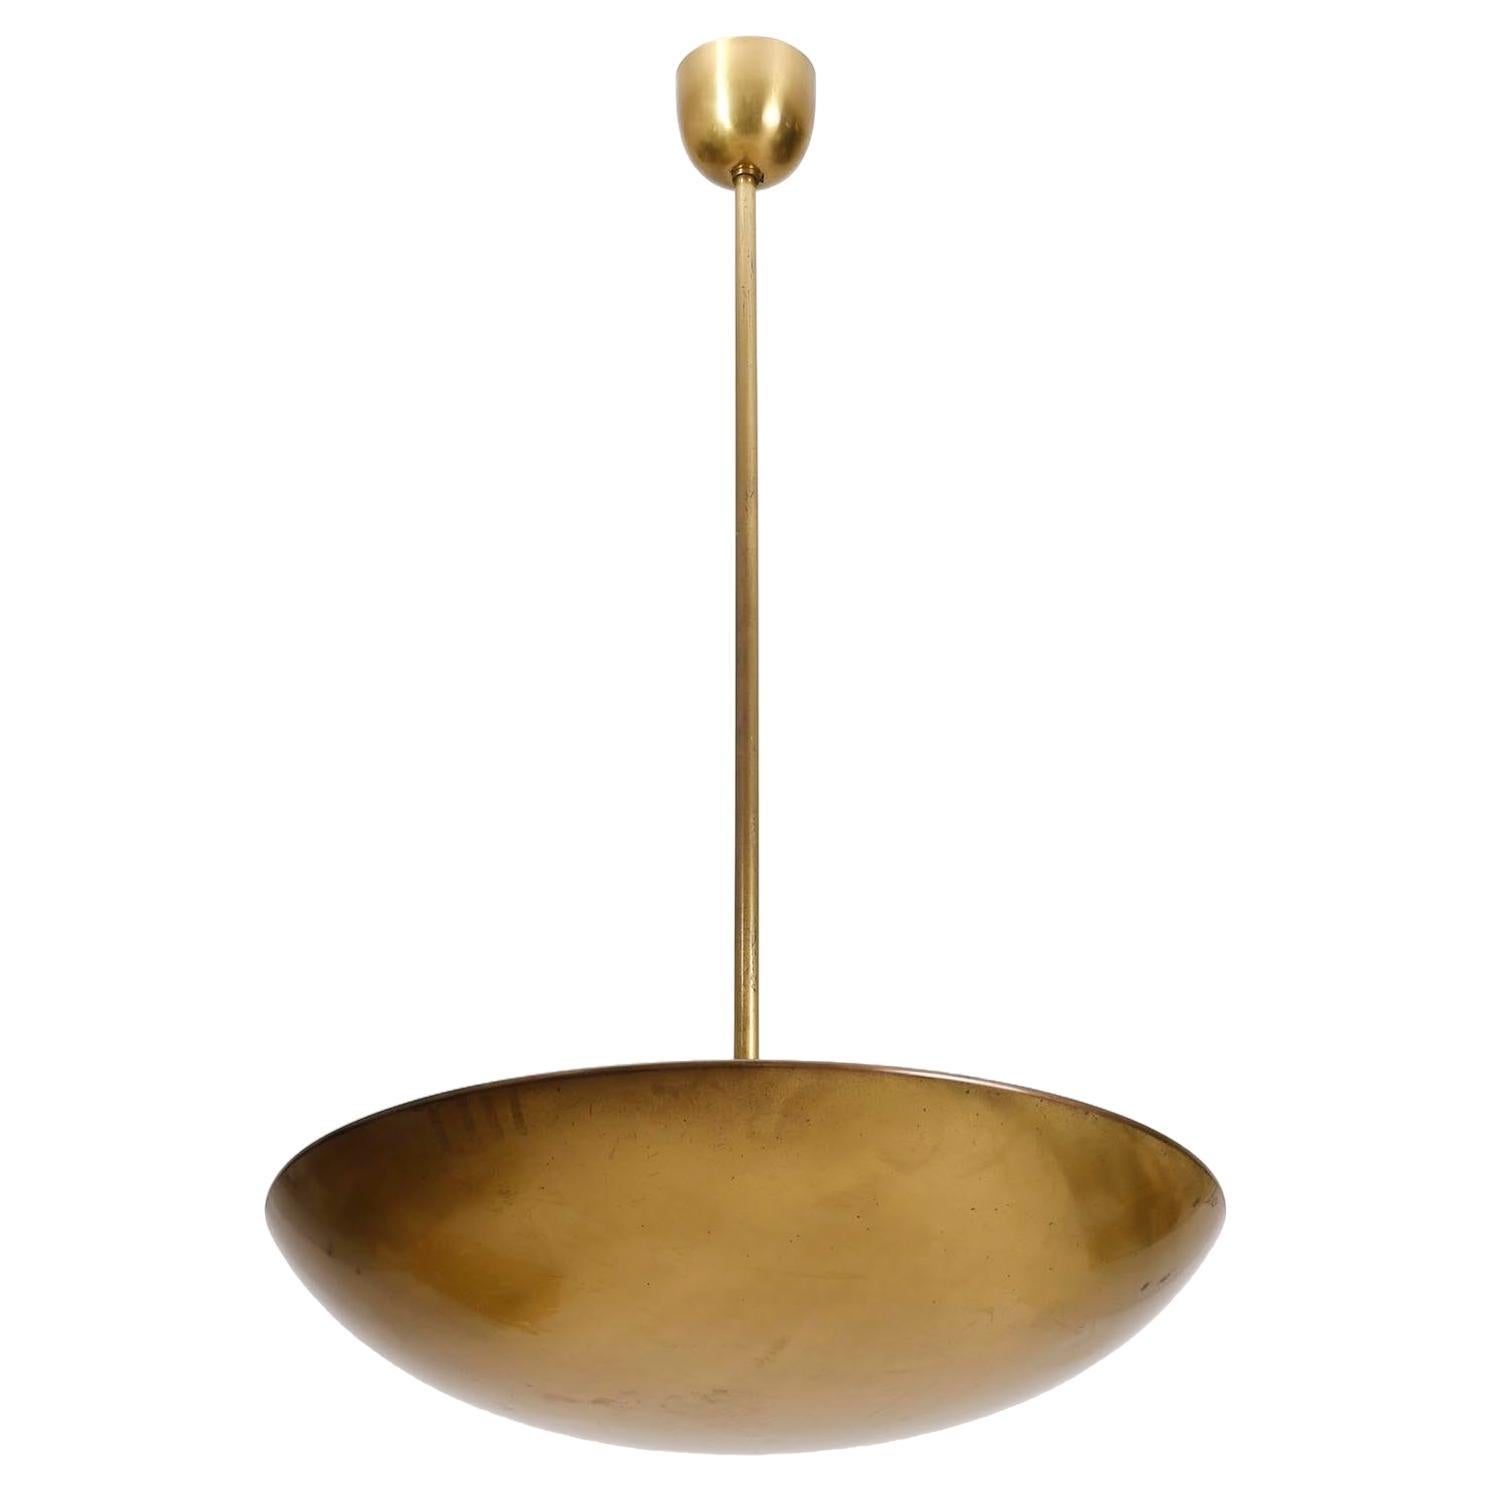 Lacquered Patinated Brass Uplight Bowl Chandelier Pendant Light by J.T. Kalmar, 1960 For Sale